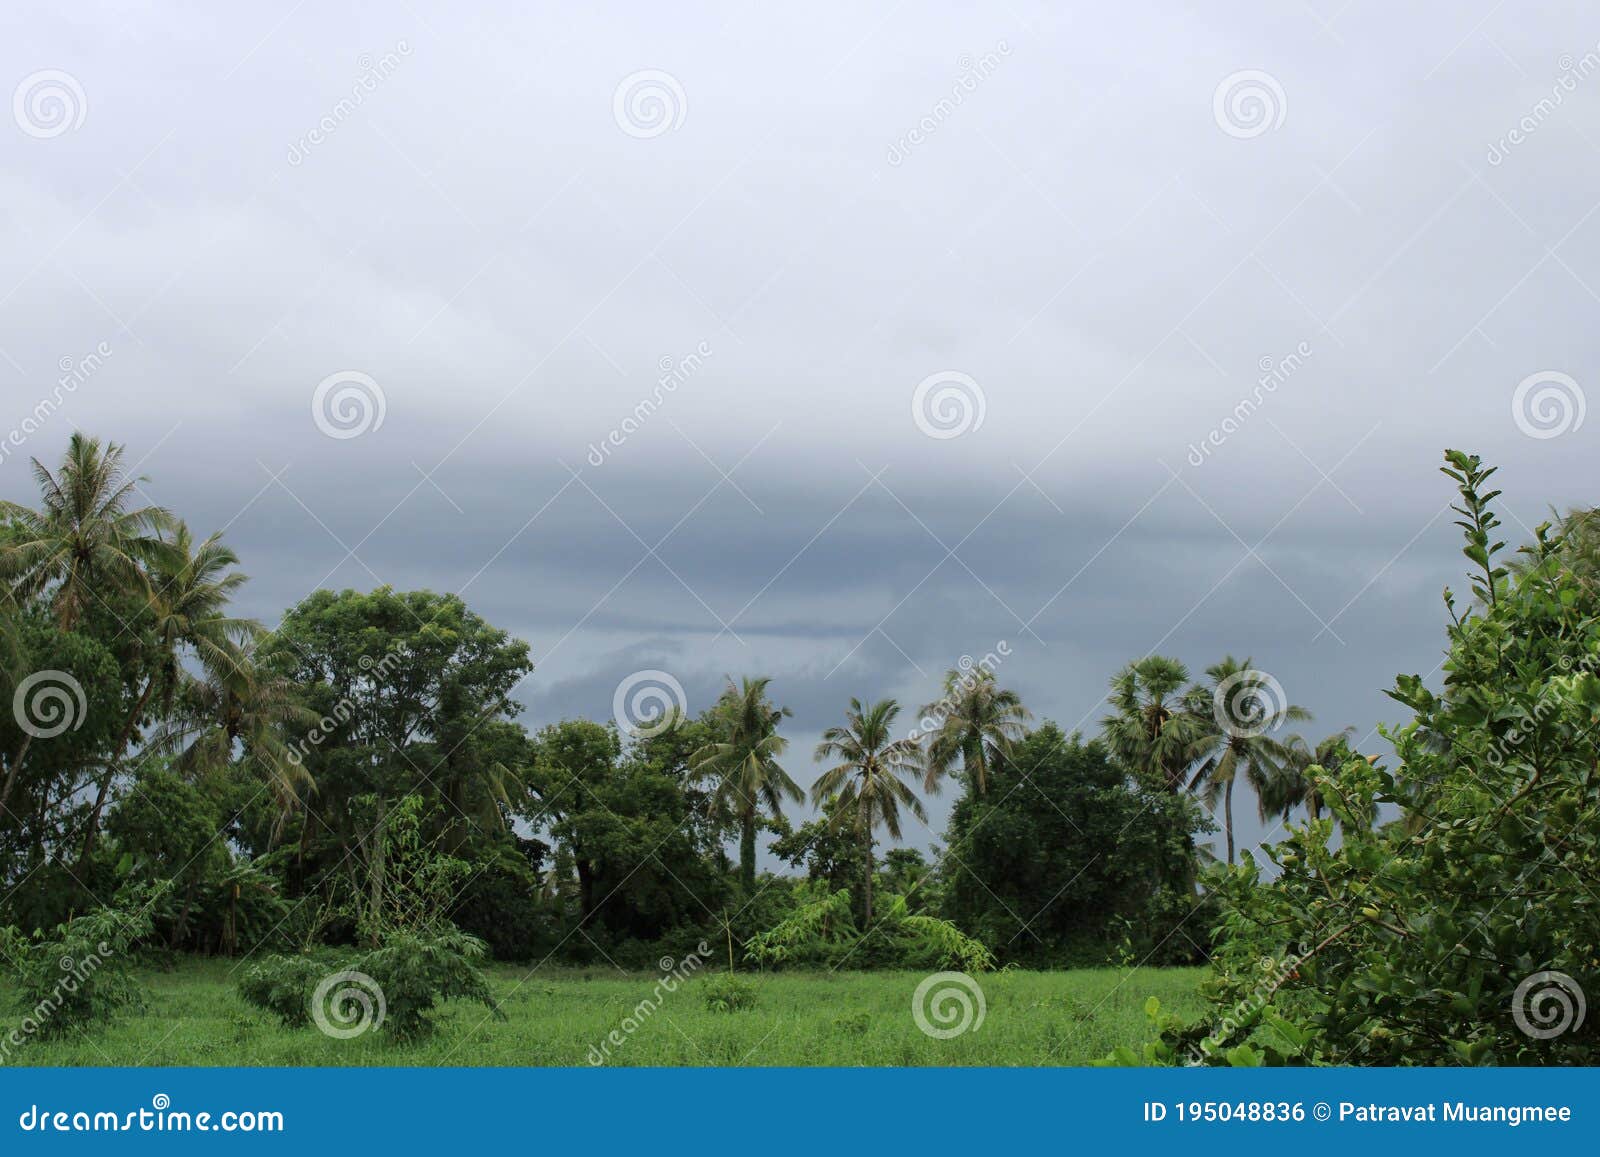 scenics of the rural in the cloudy day.